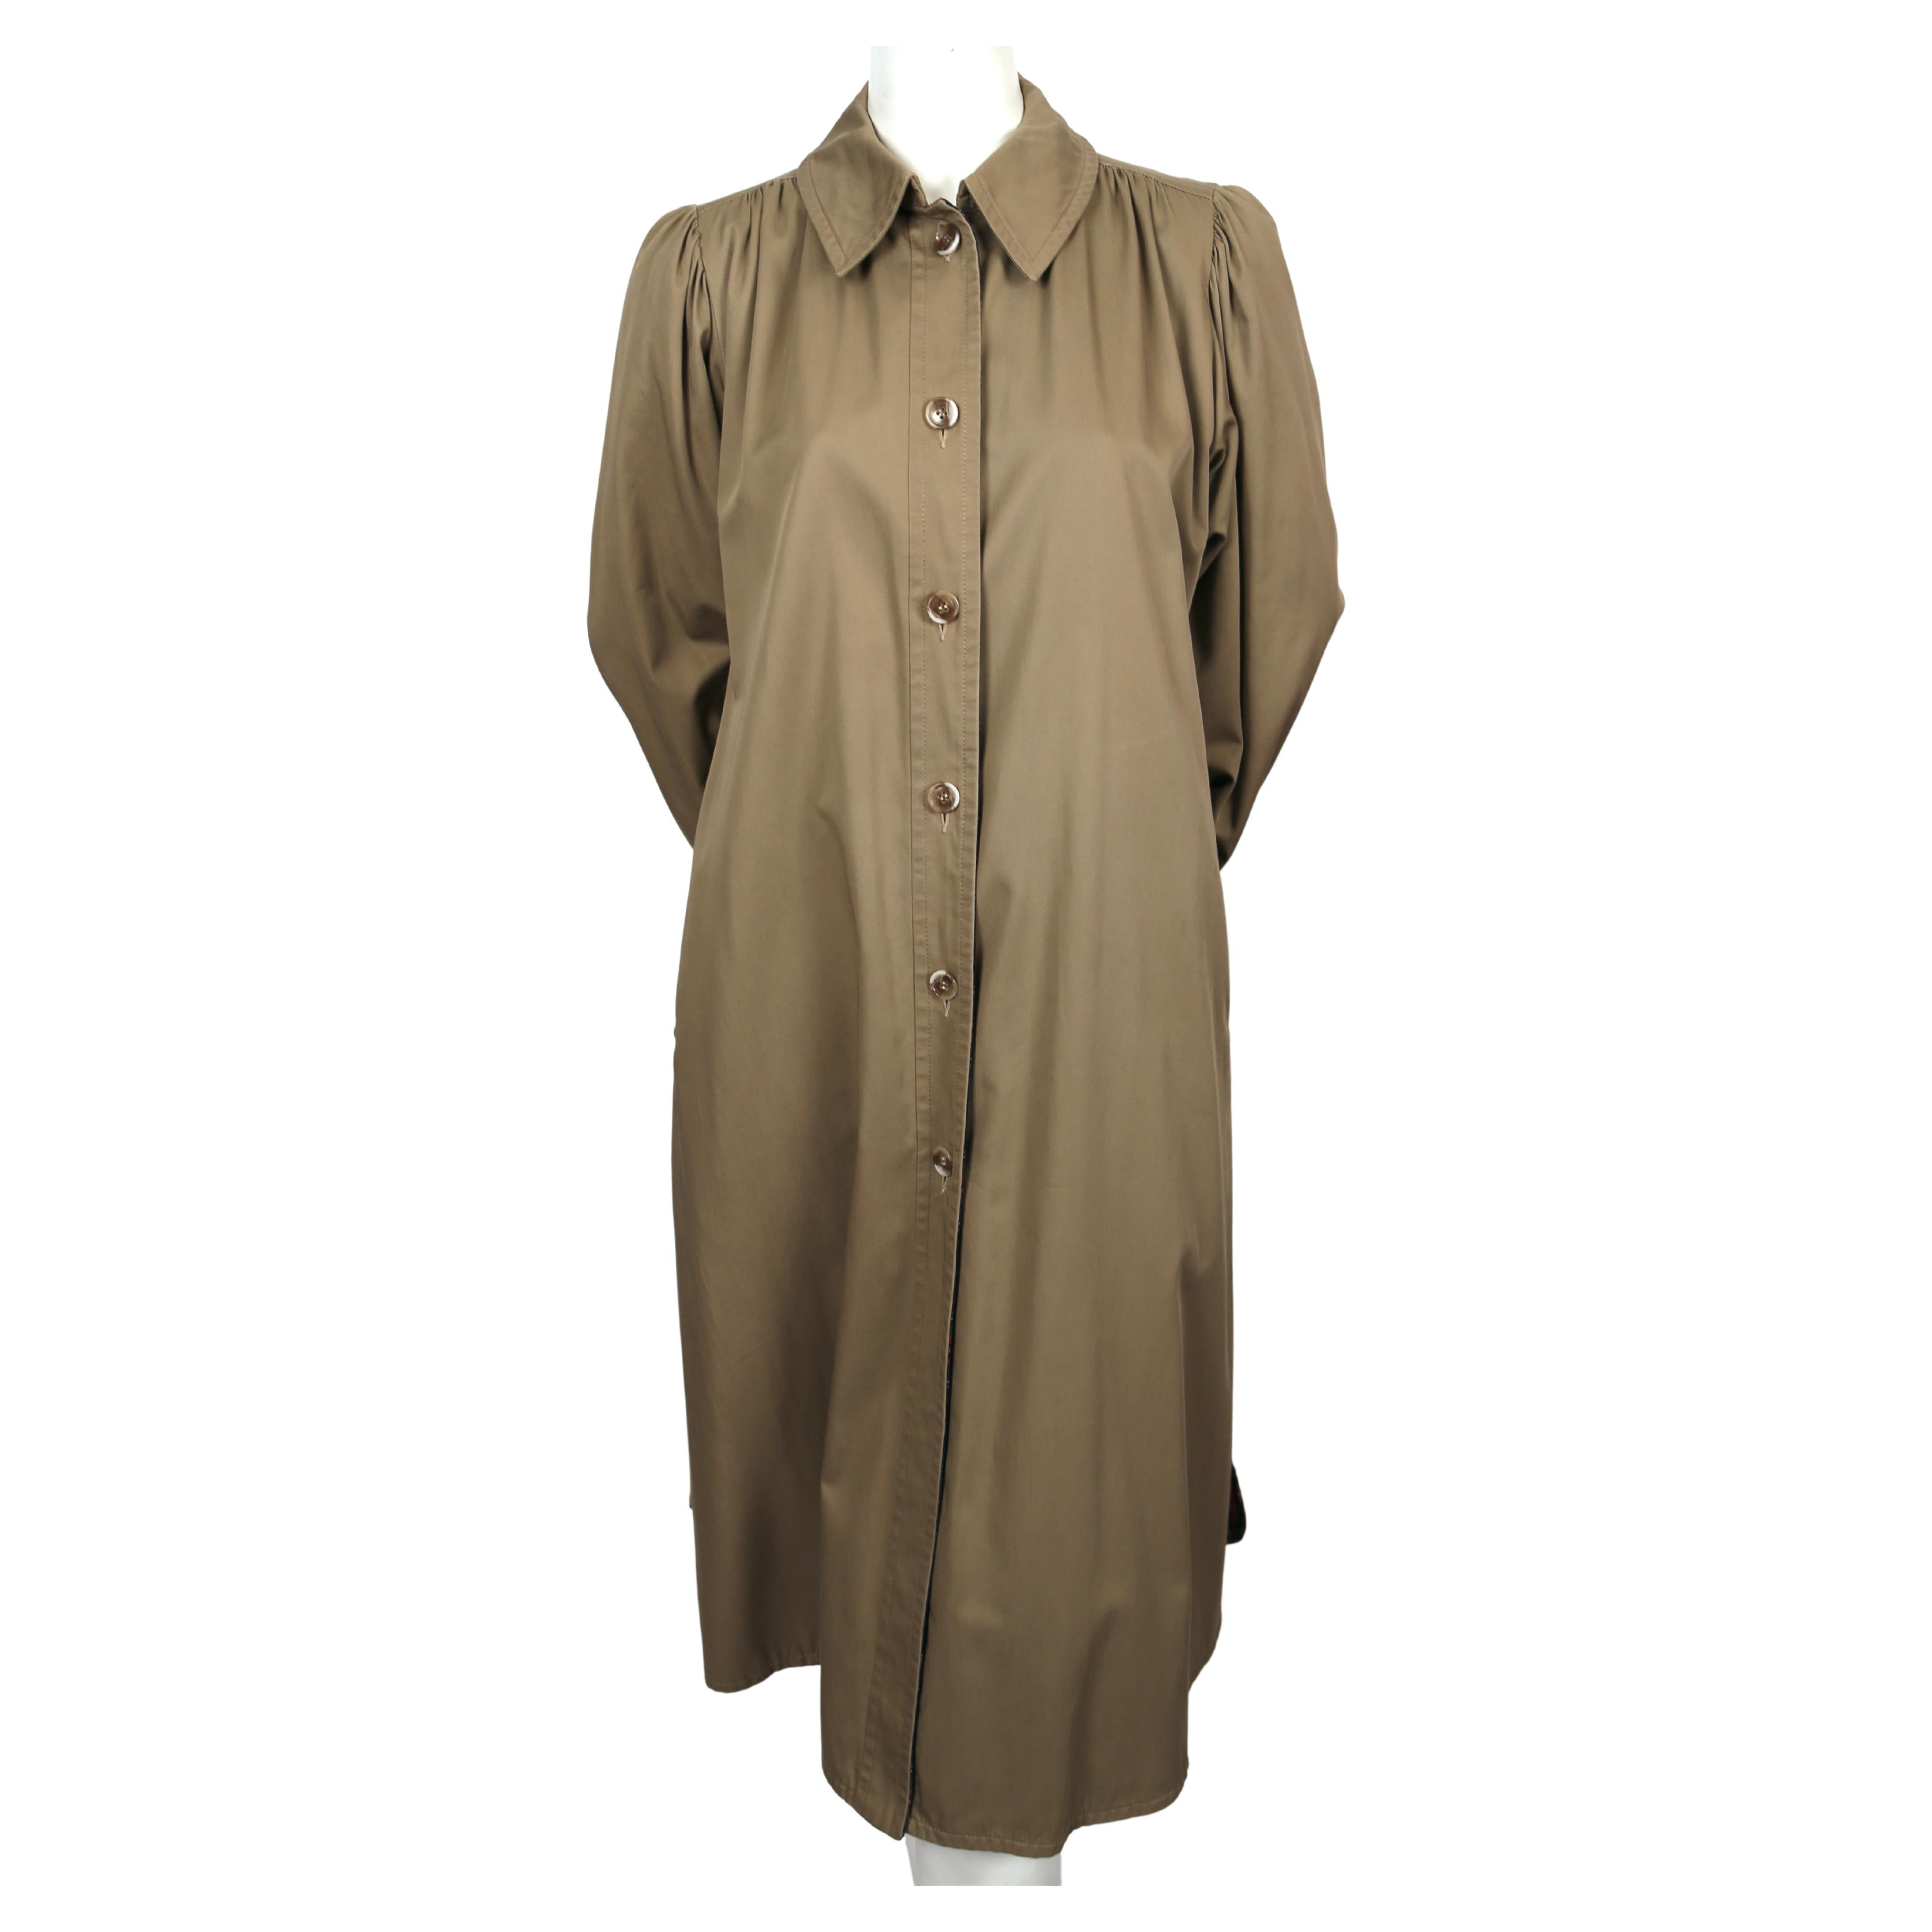 Classic, khaki-cotton trench coat with puff sleeves and plaid lining designed by Yves Saint Laurent dating to the 1970's. No size is indicated however this will best fit a US 4-10.   Approximate measurements: shoulder 15